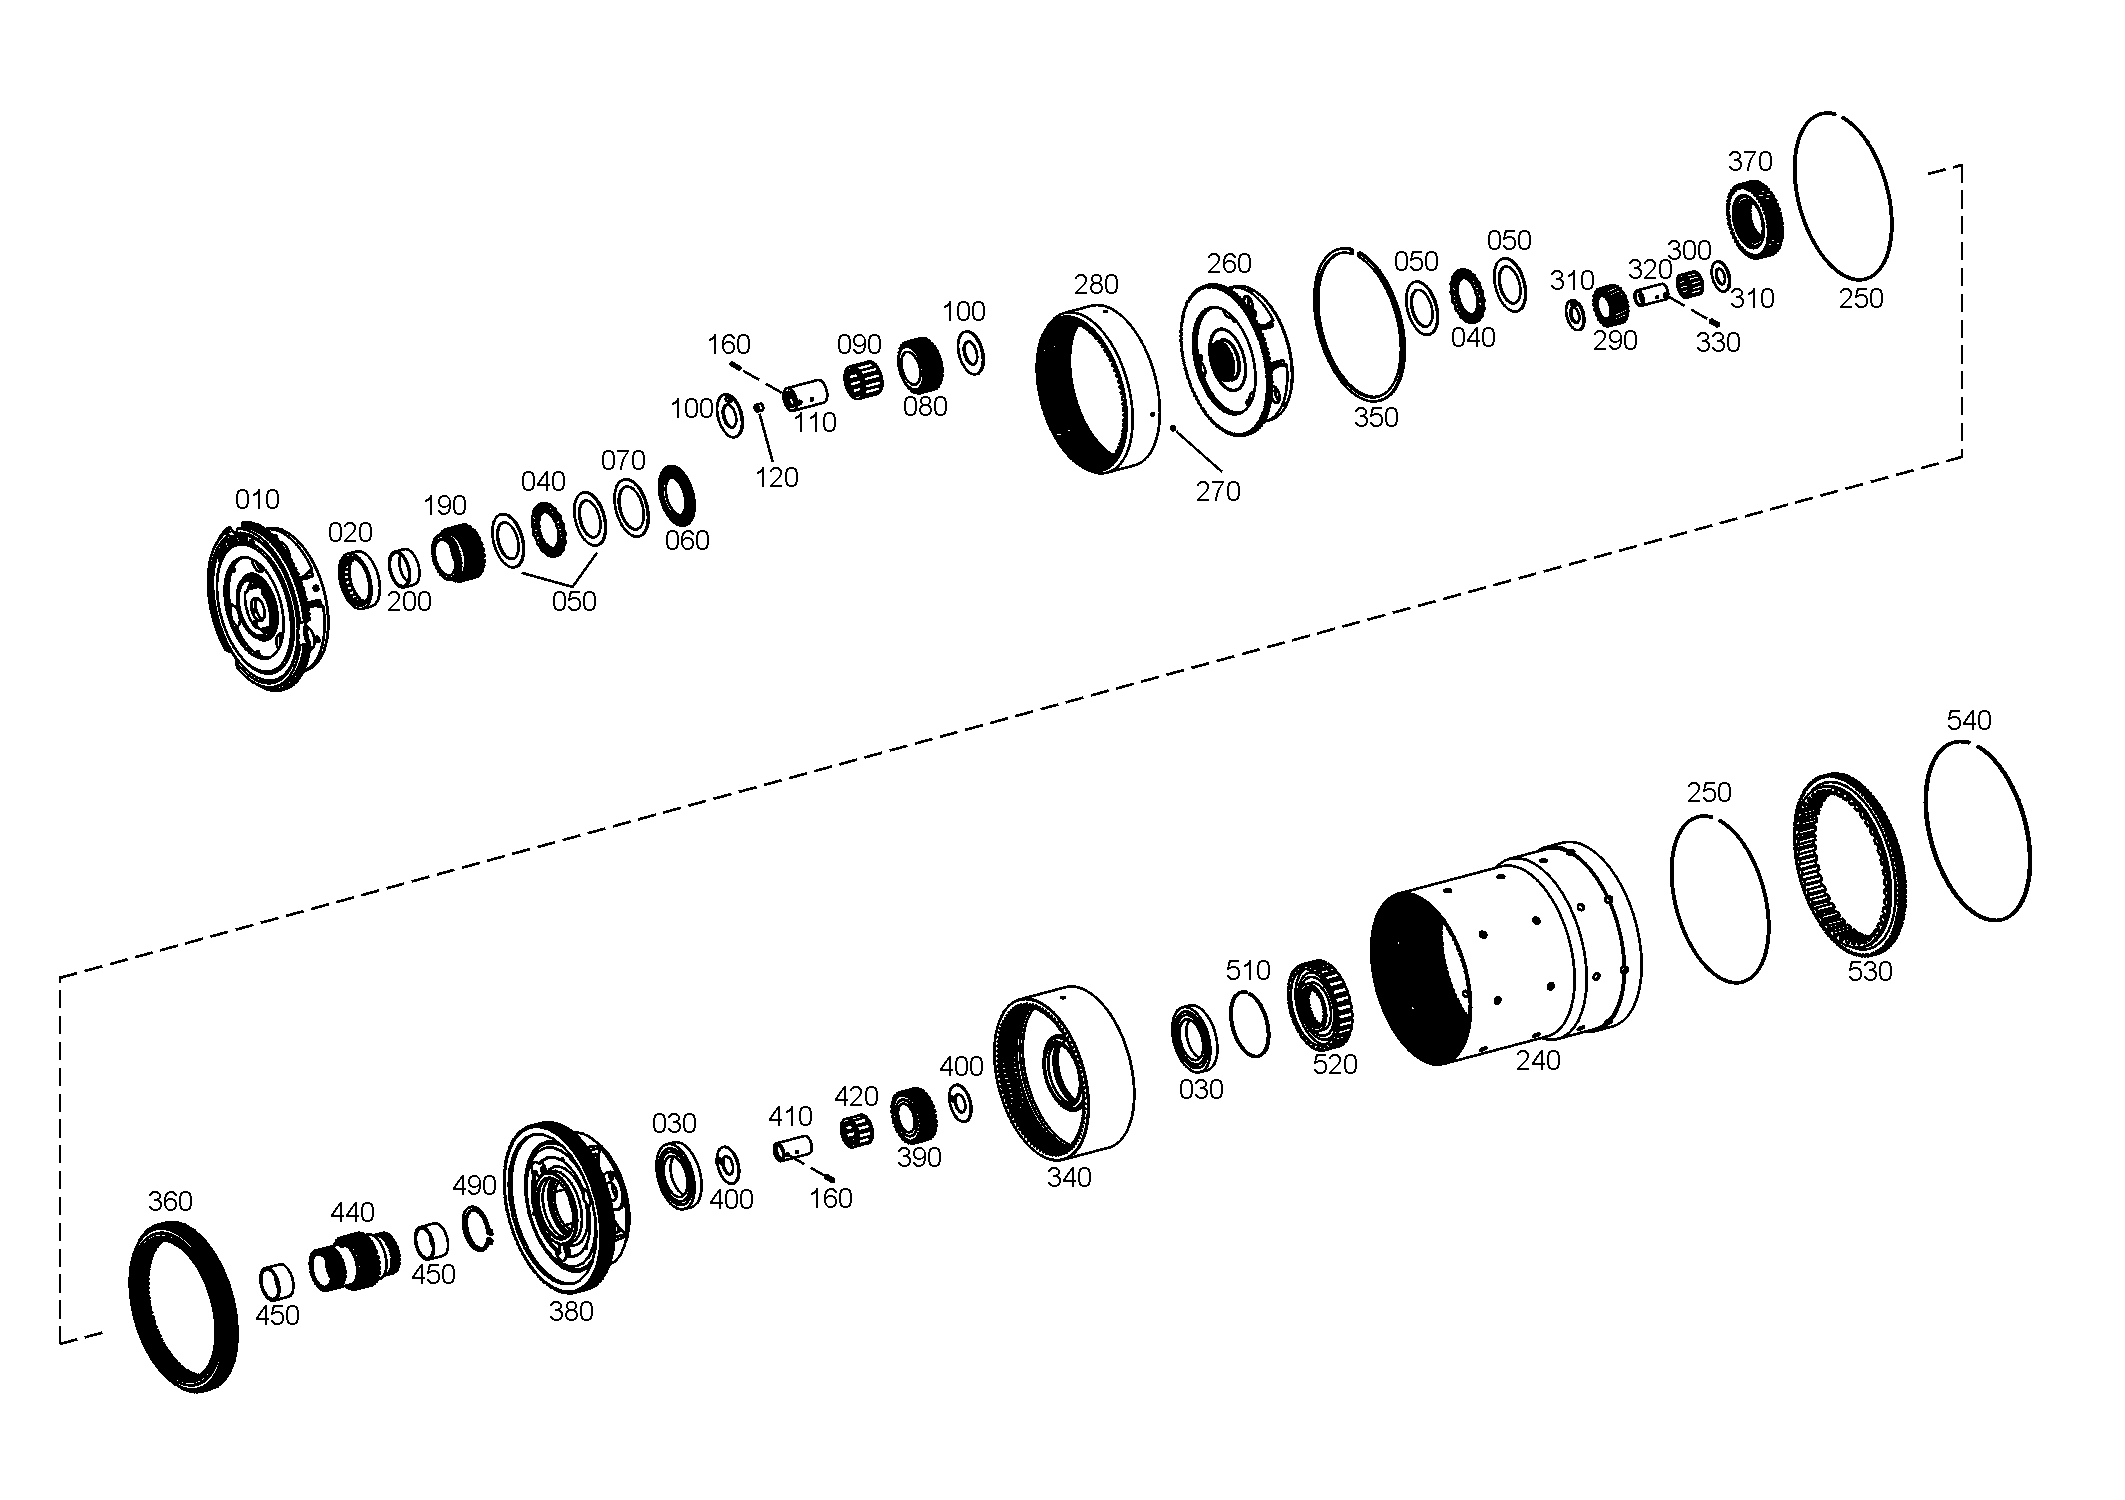 drawing for PPM 09397960 - BALL BEARING (figure 5)